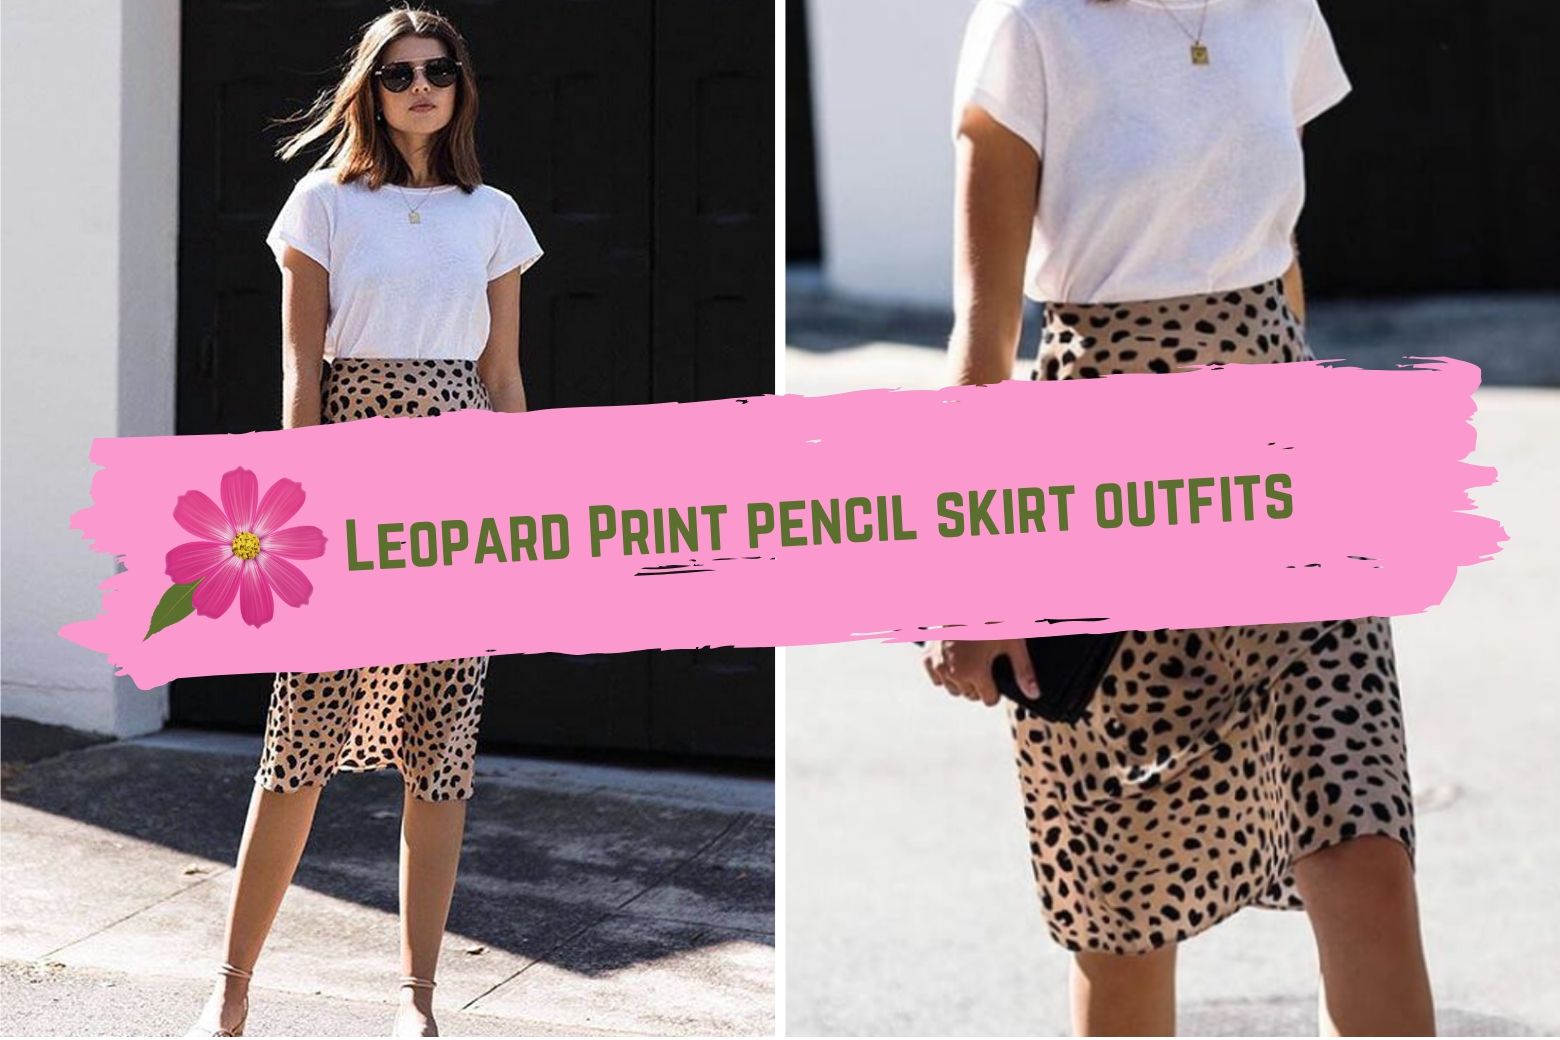 Stylish Leopard Print Pencil Skirt Outfits – Trending Outfit Ideas